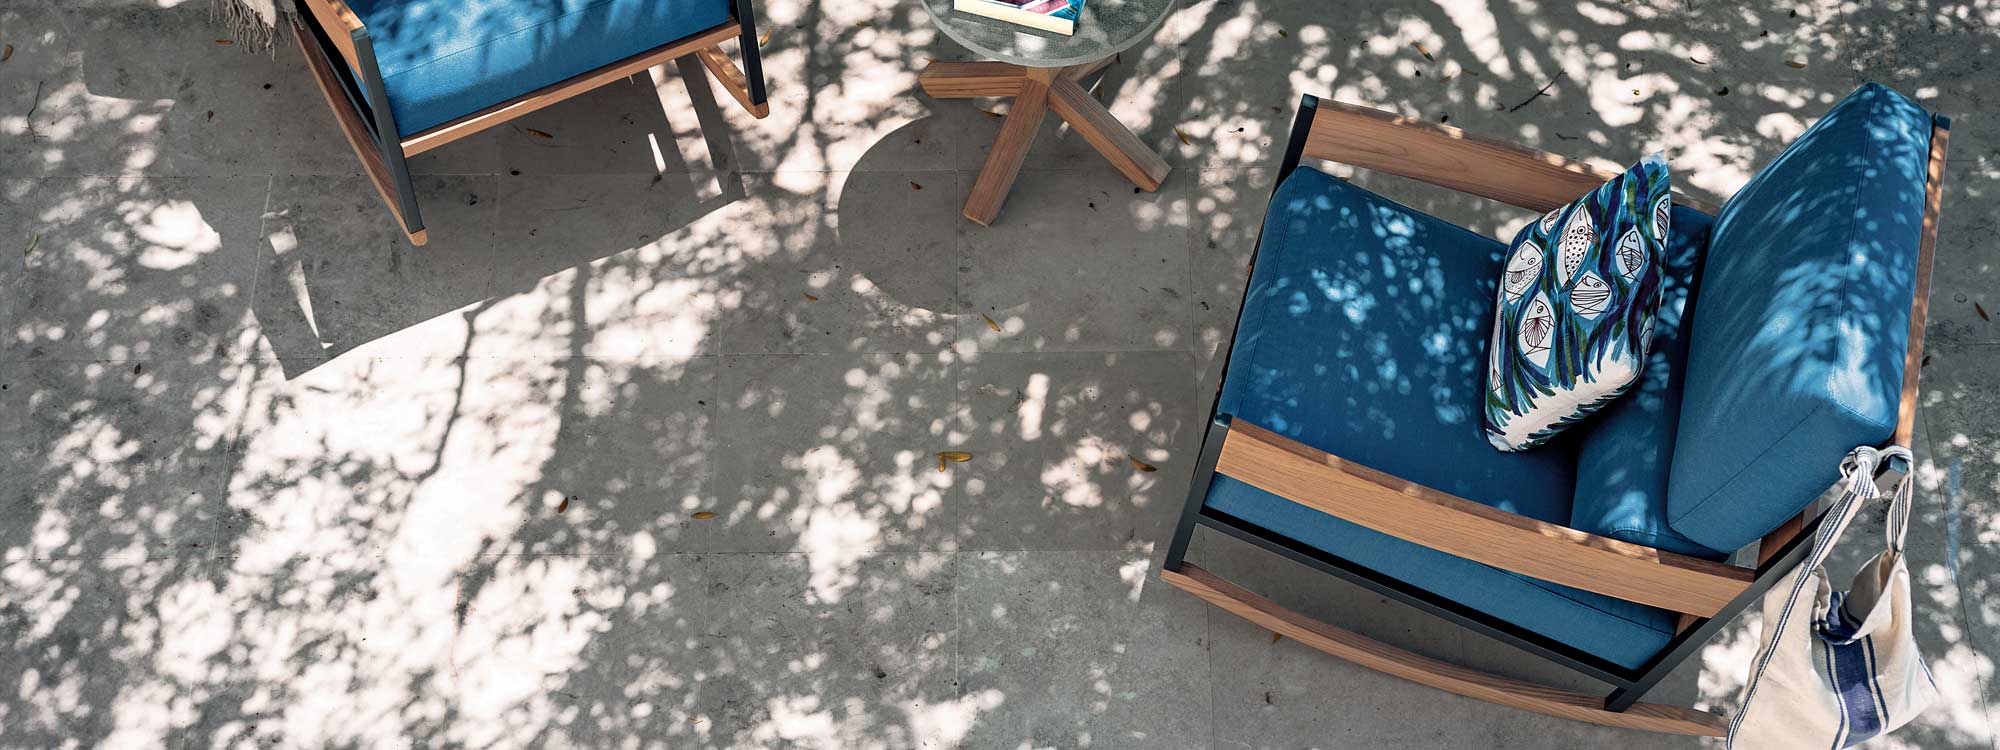 Image of birdseye view of pair of Nap contemporary garden rocking chairs with blue cushions, next to Root exterior side table